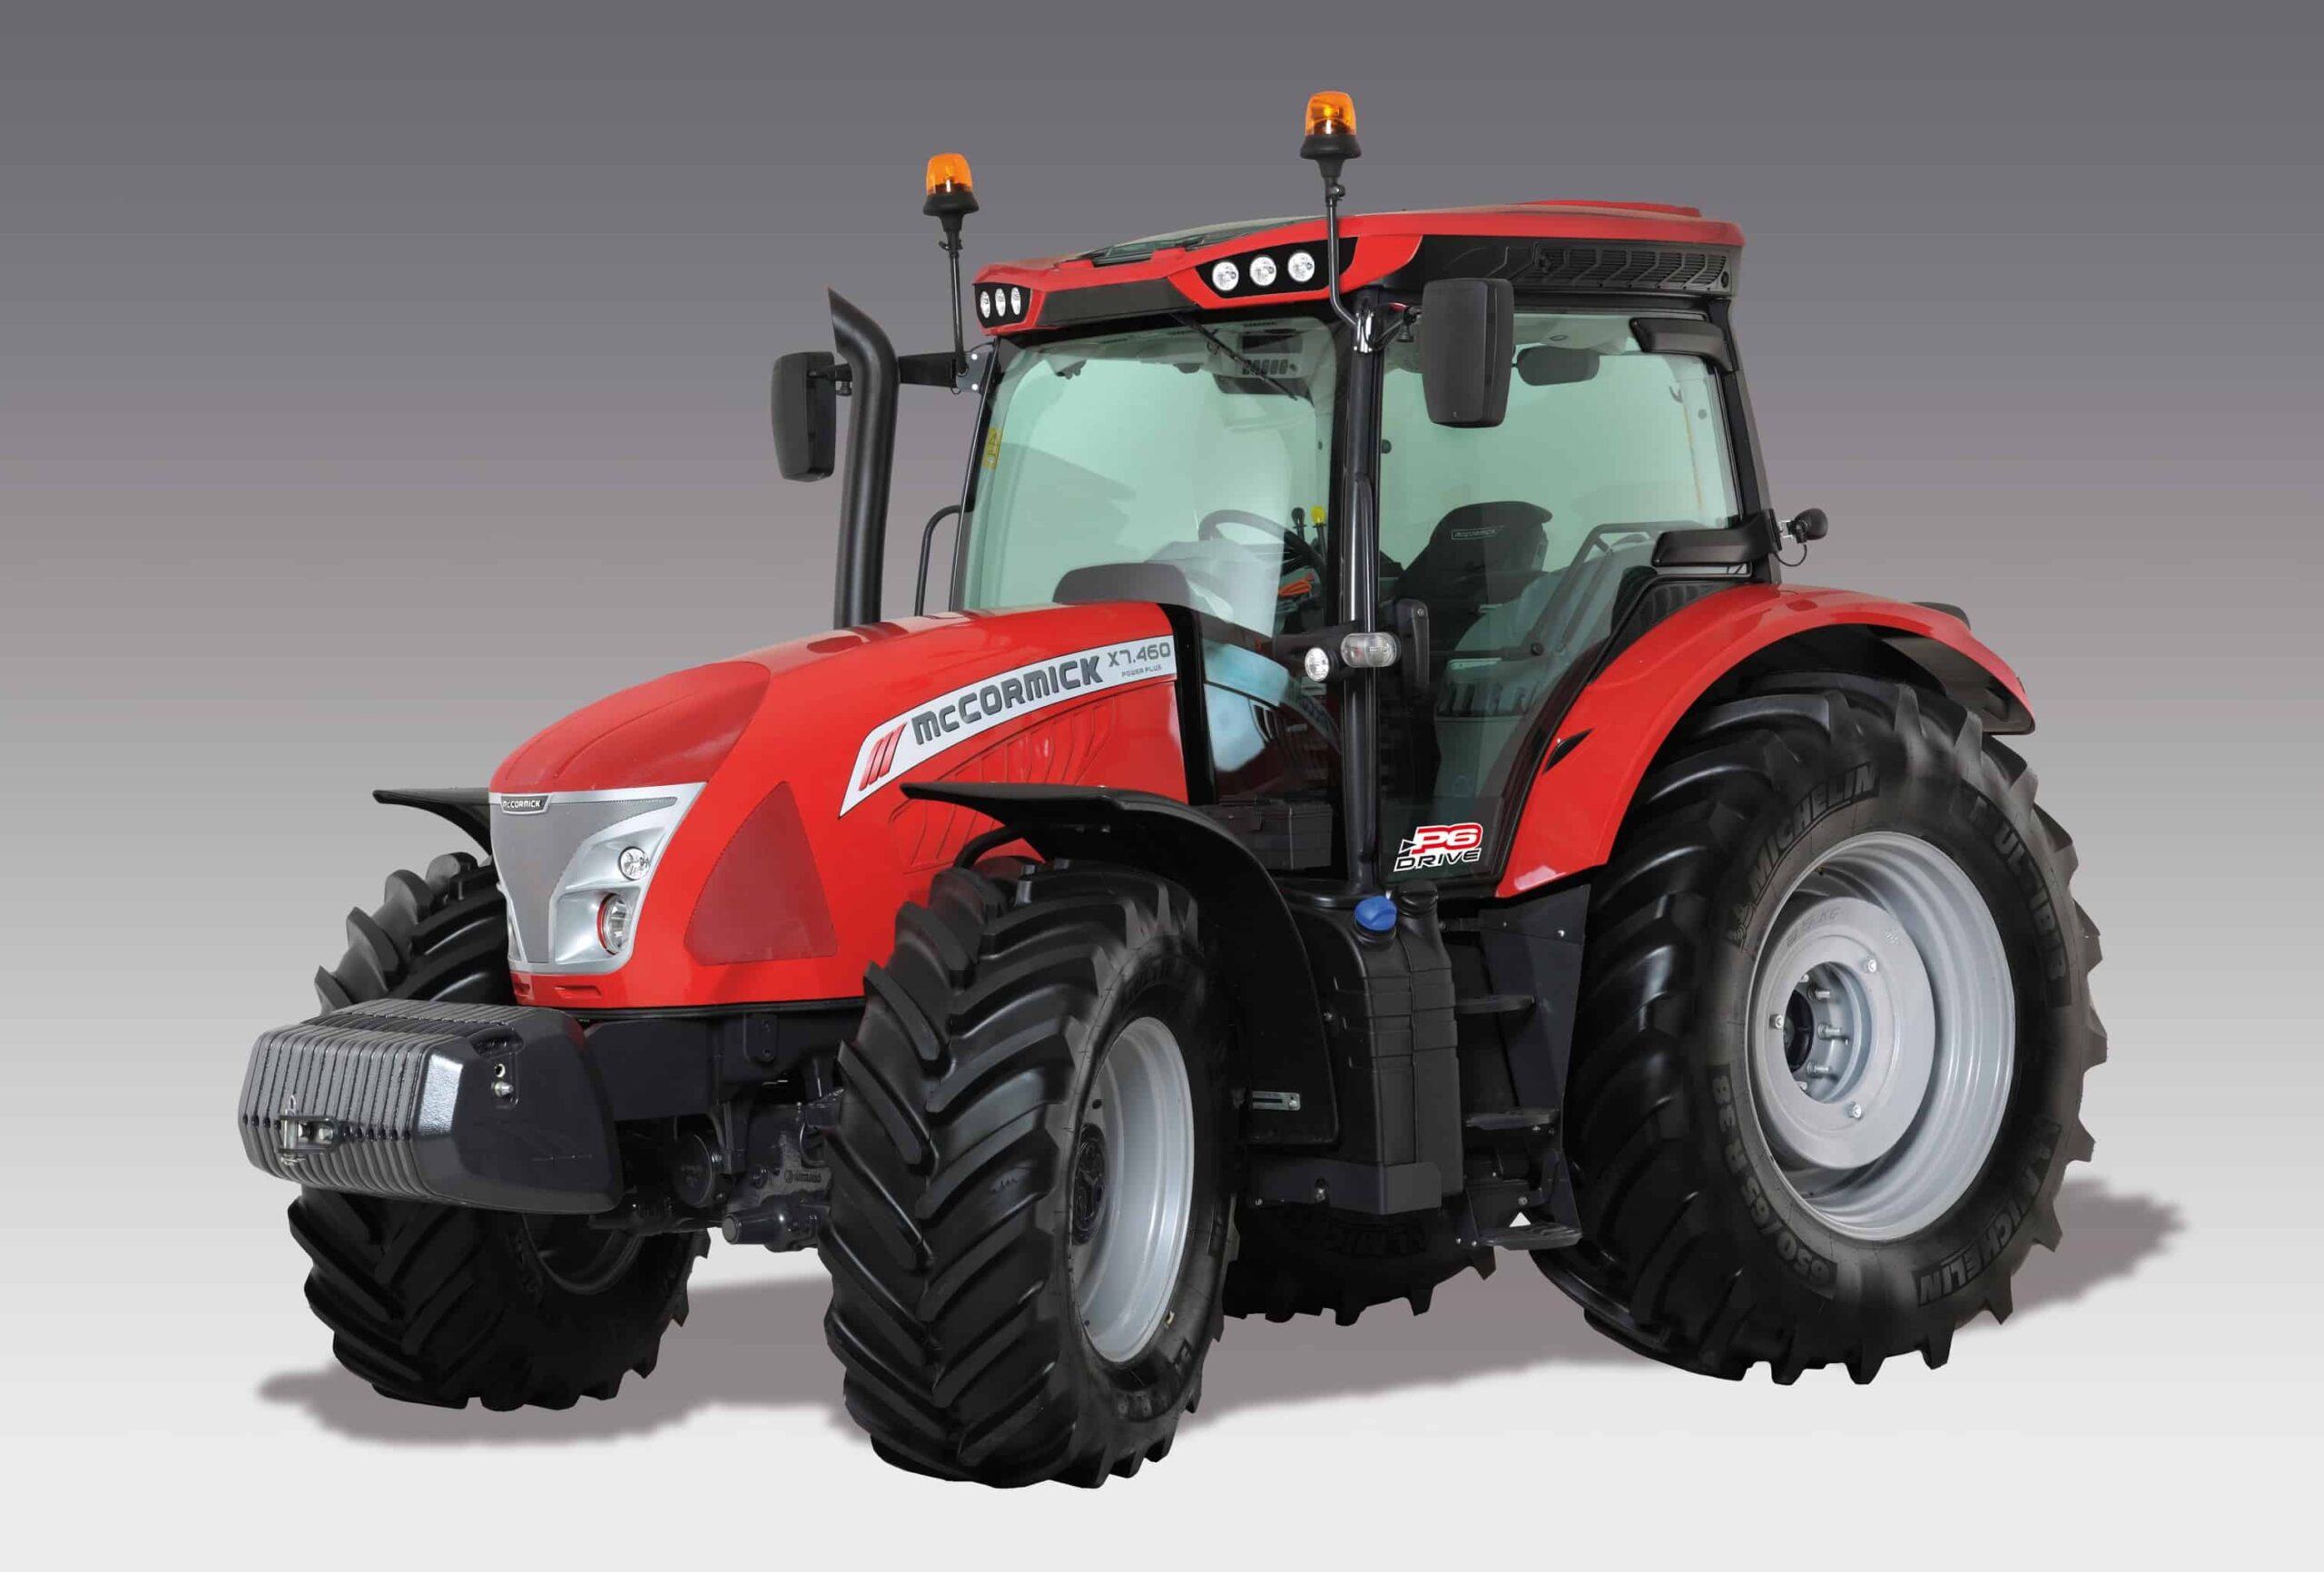 New four-cylinder McCormick X7 Series tractors have more power and features